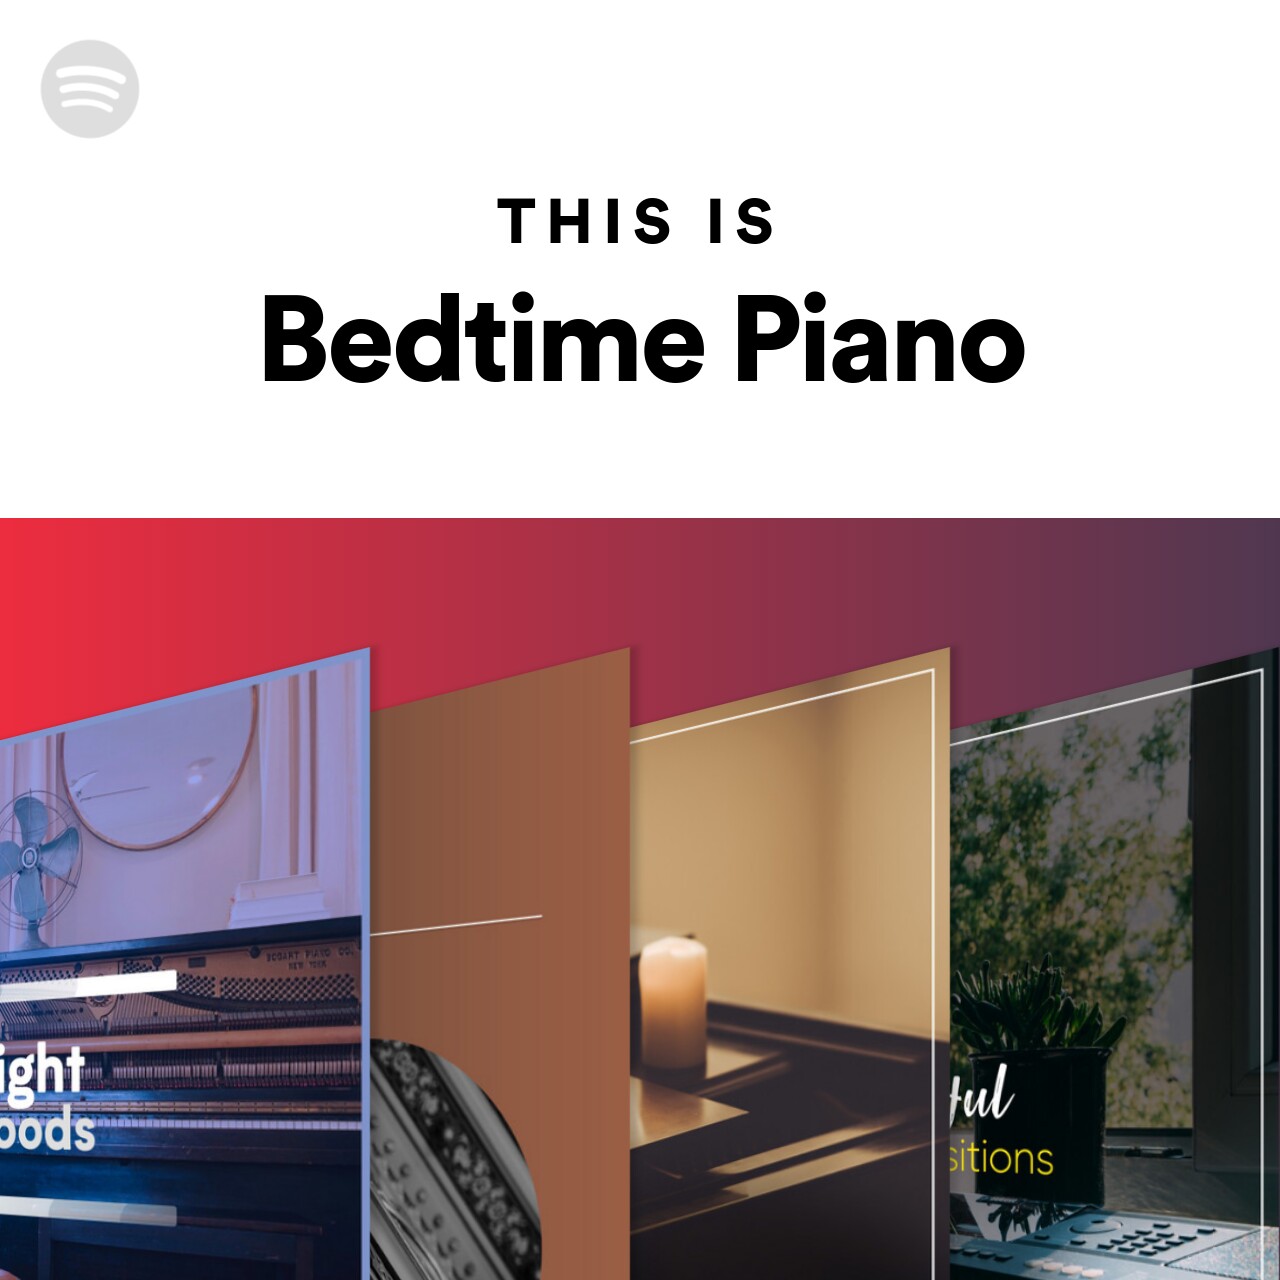 This Is Bedtime Piano